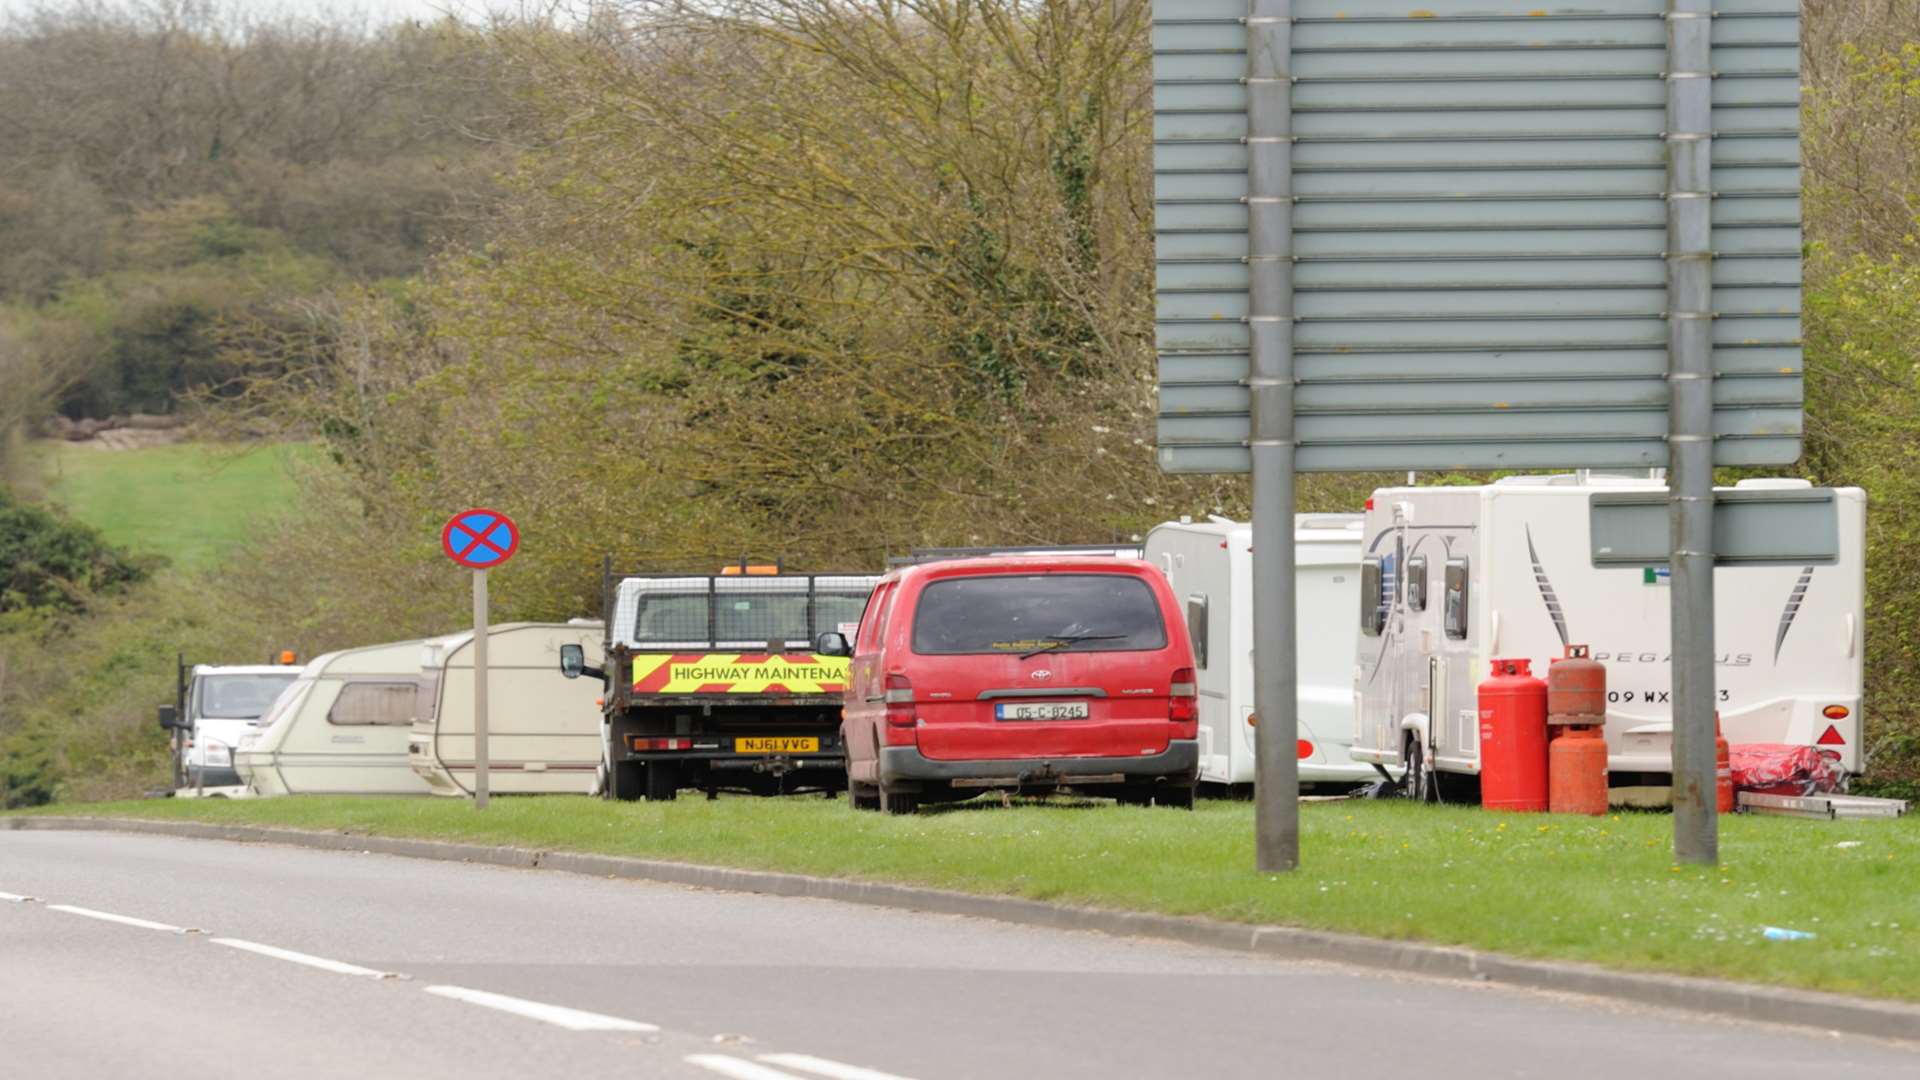 Travellers have pitched up on a grass verge near the roundabout and Darent Valley Hospital but are being moved on.